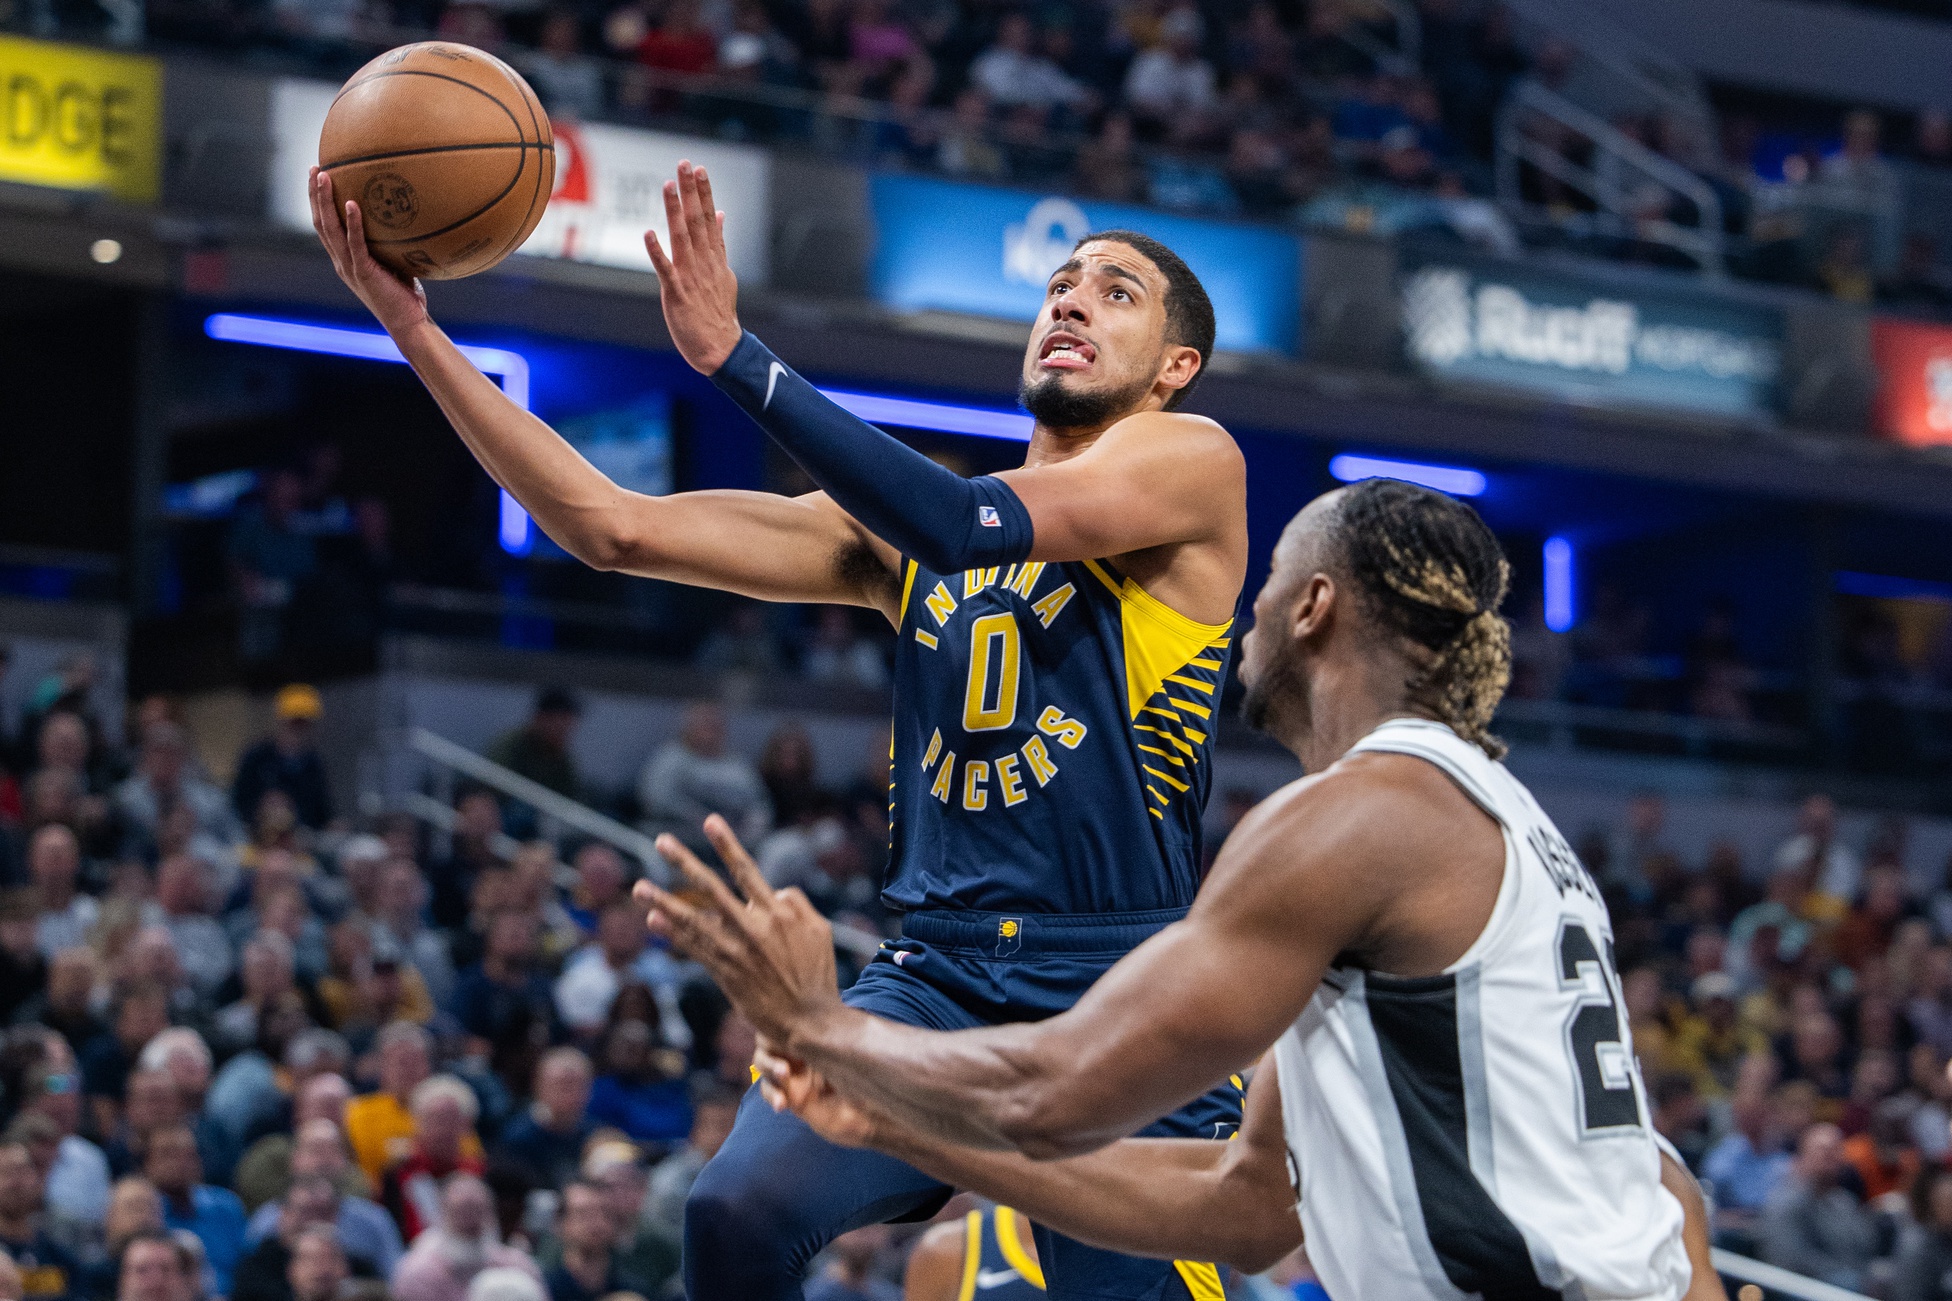 Indiana Pacers guard Tyrese Haliburton (0) shoots the ball while San Antonio Spurs guard Malaki Branham (22) defends in the first quarter at Gainbridge Fieldhouse.